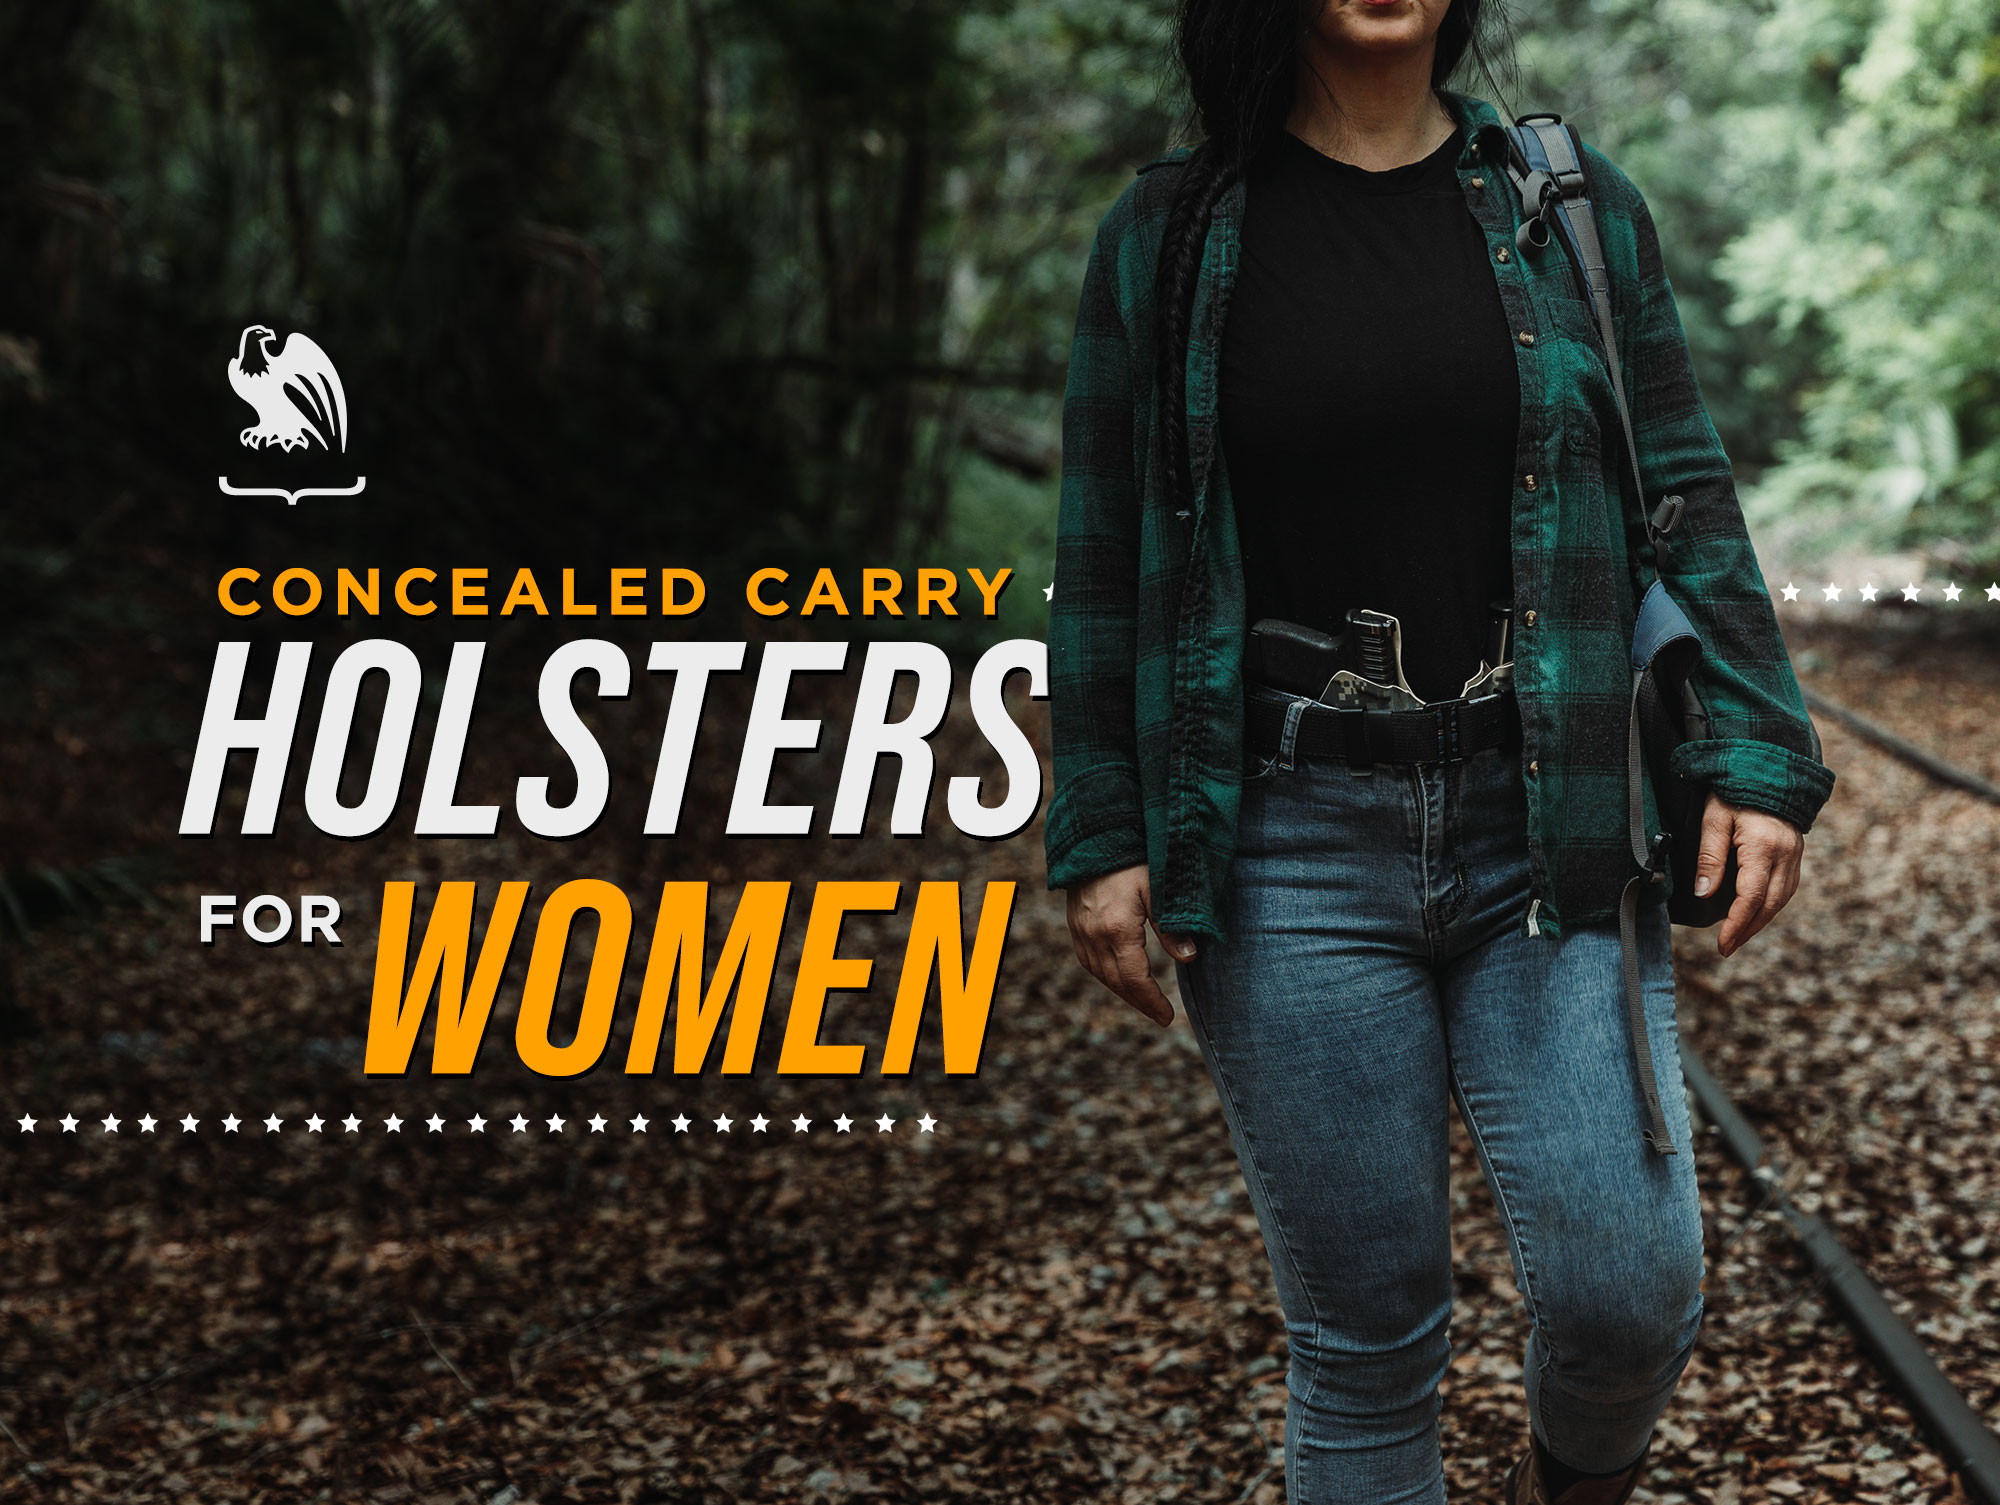 We The People Holsters - Strong and BOLD, just like the women who